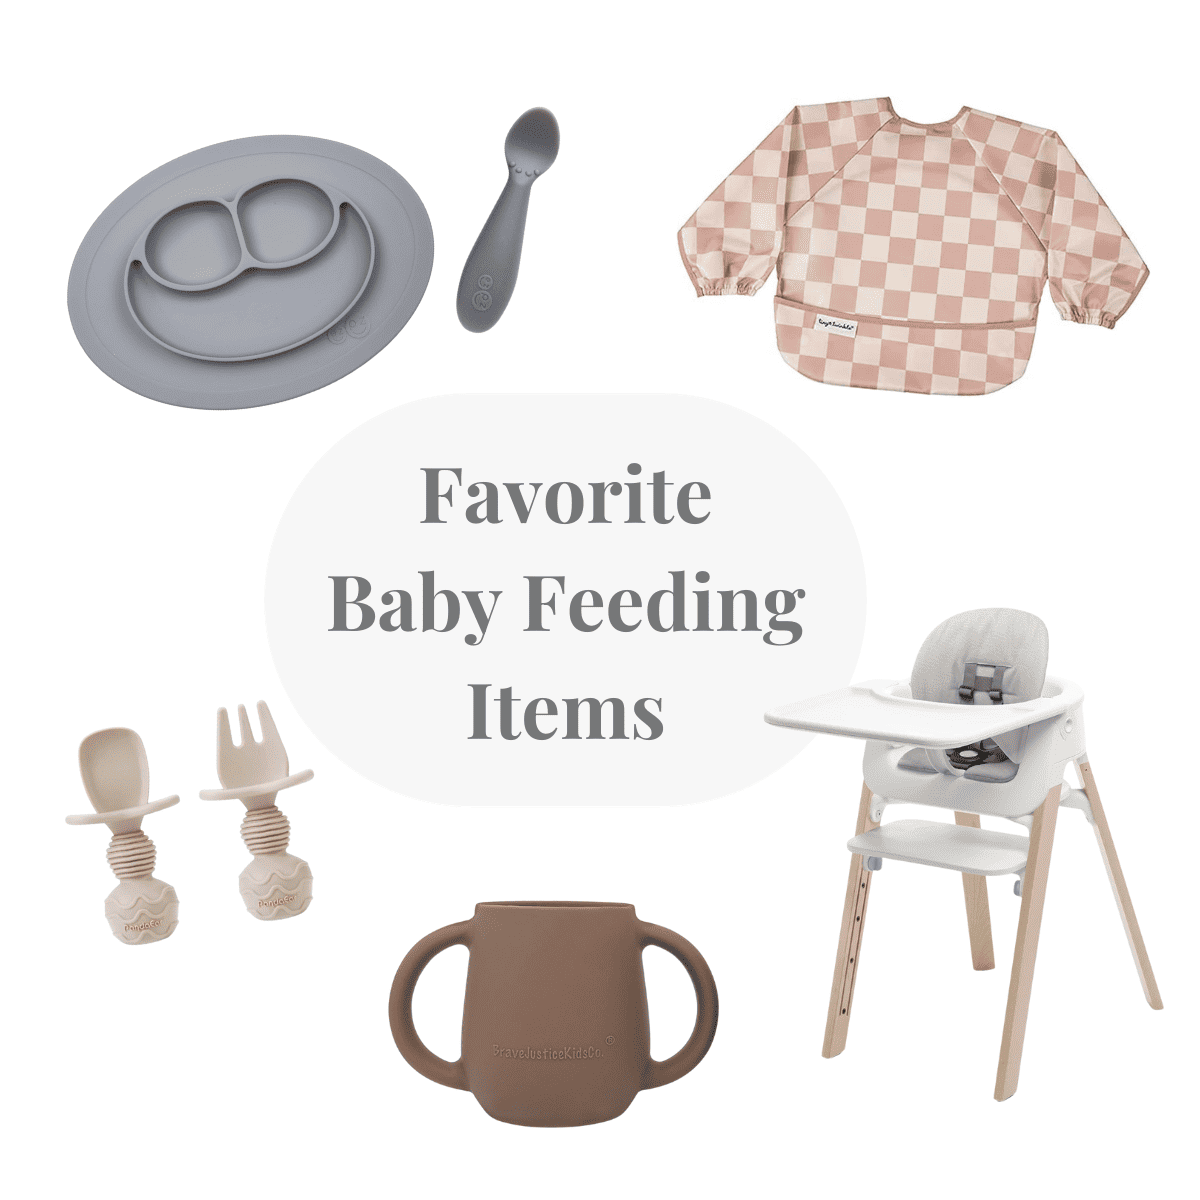 Baby Feeding Items for Starting Solids